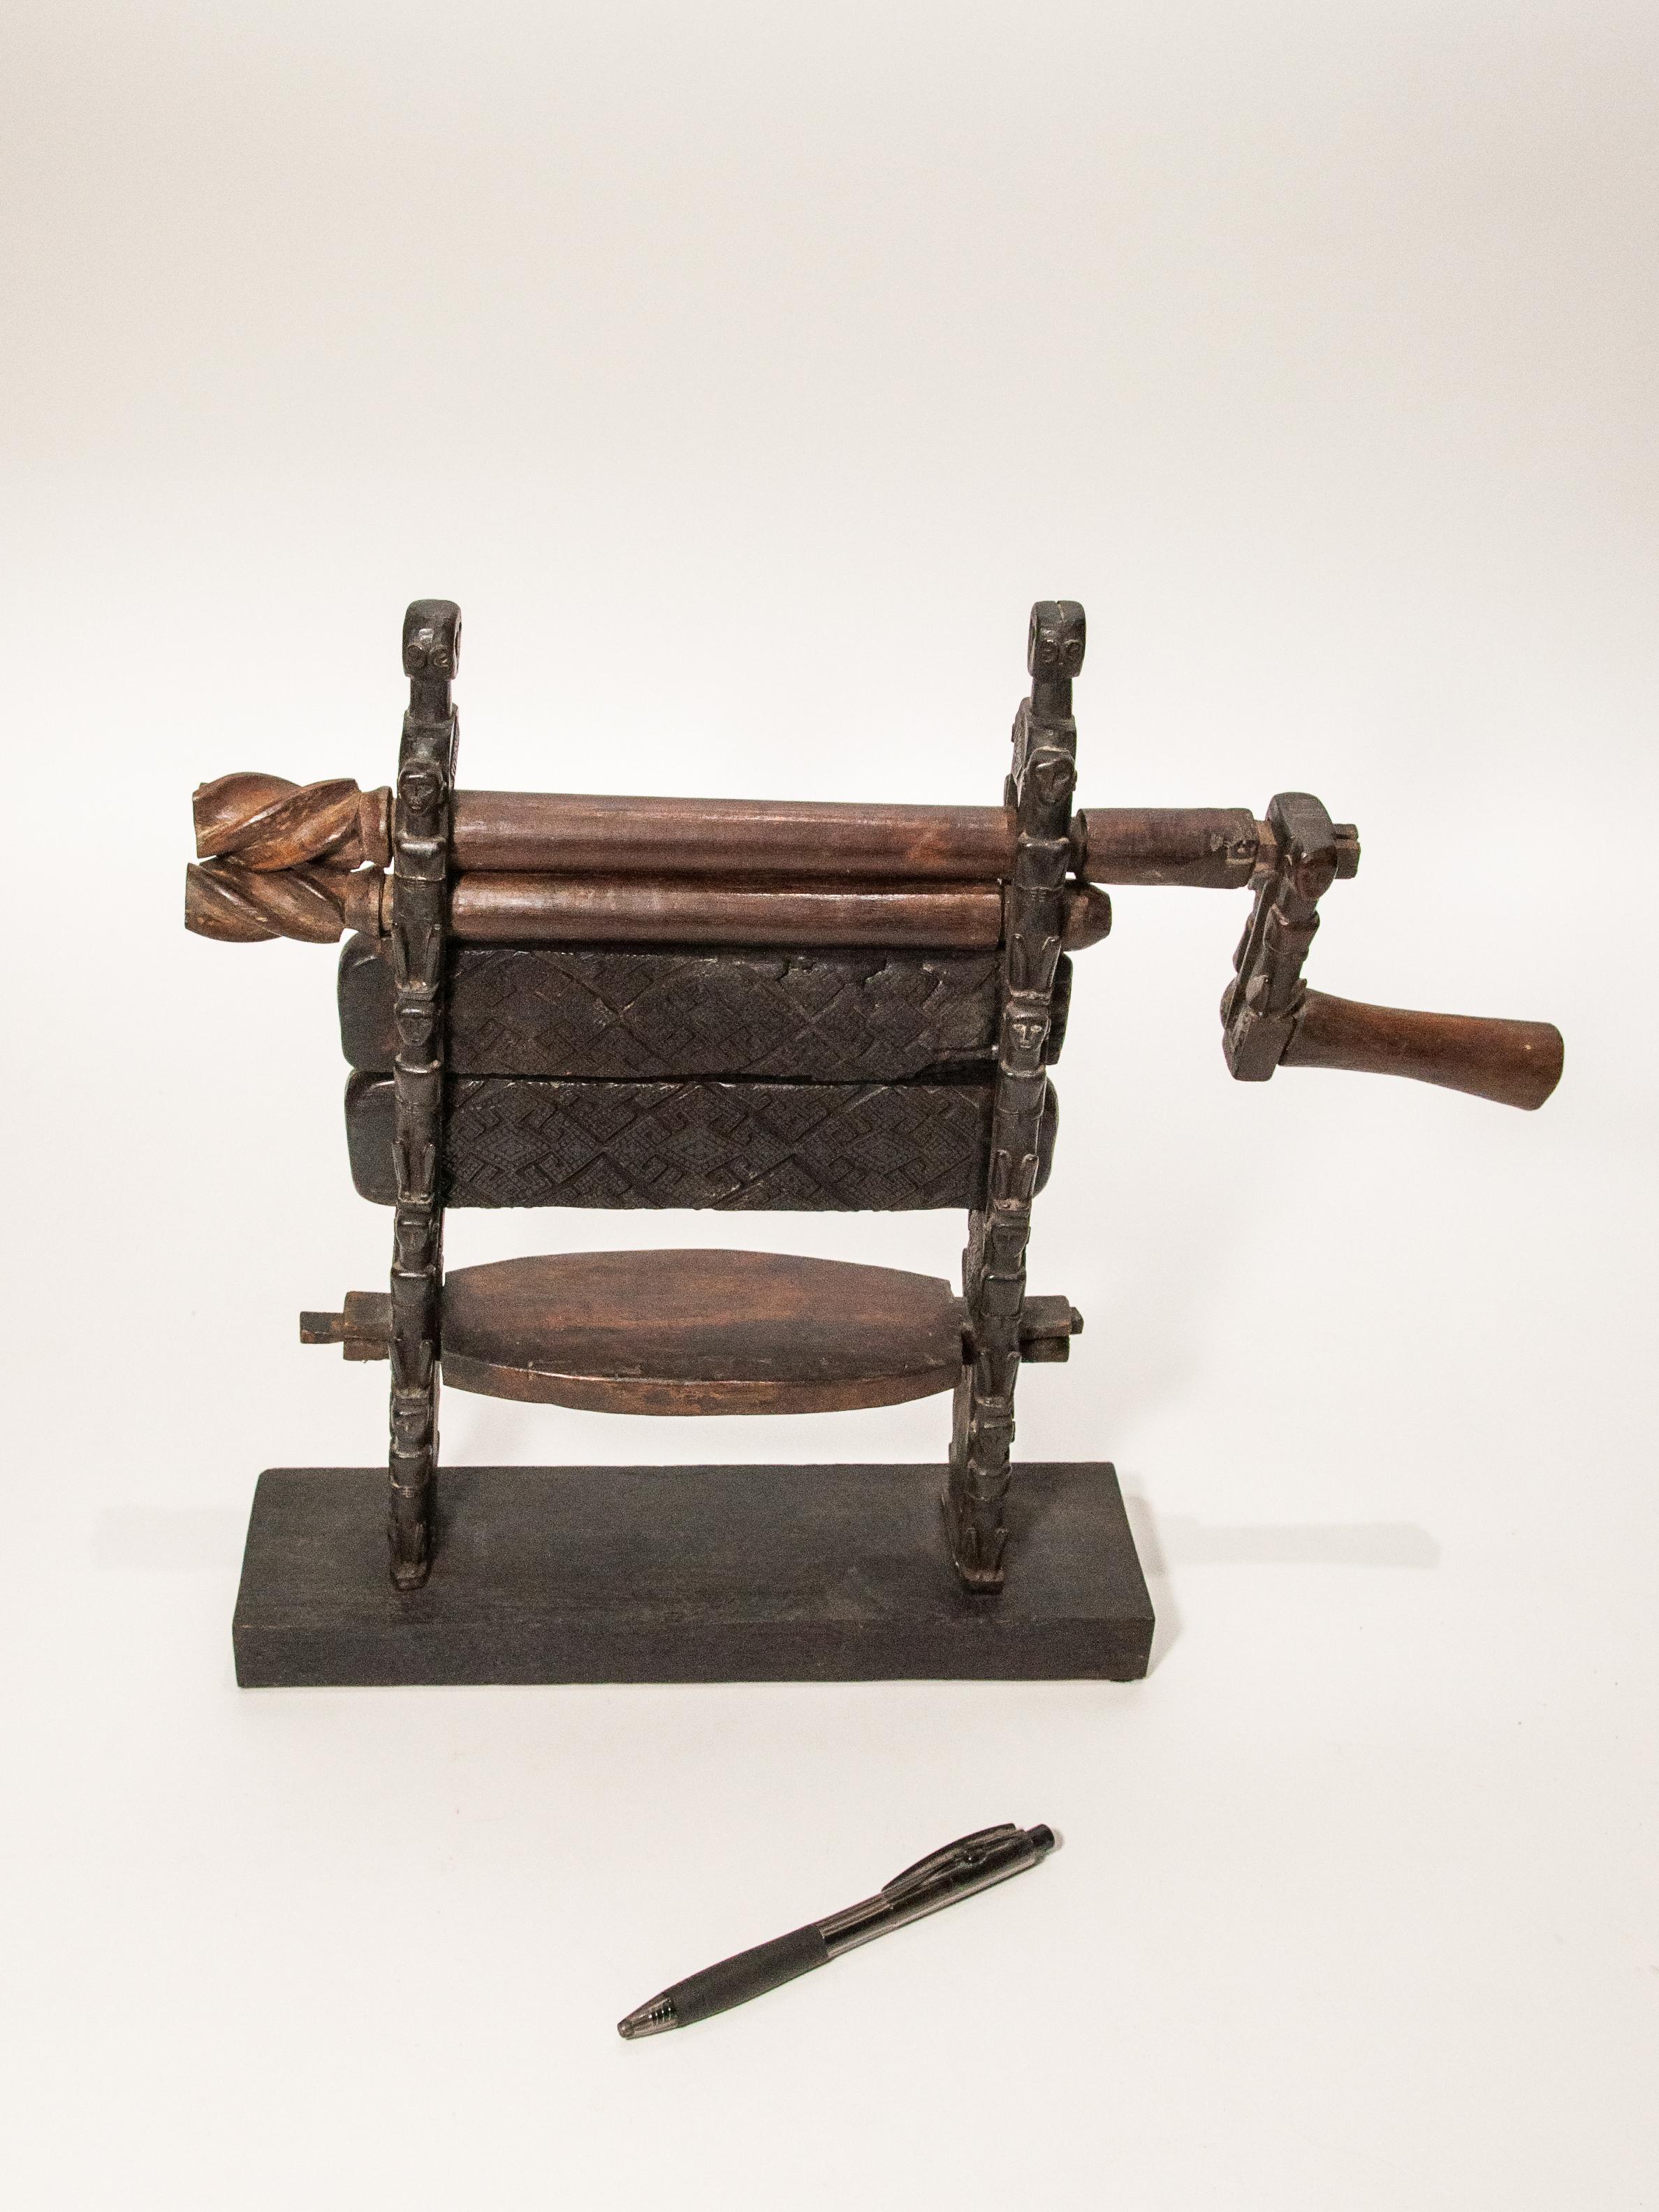 Small carved ceremonial cotton gin from the Atoni of West Timor. Mid-late 20th century, set on a wooden stand for stability and display.
This is a relatively small scale hand carved example of a cotton gin, called a bninis in the Atoni language, of